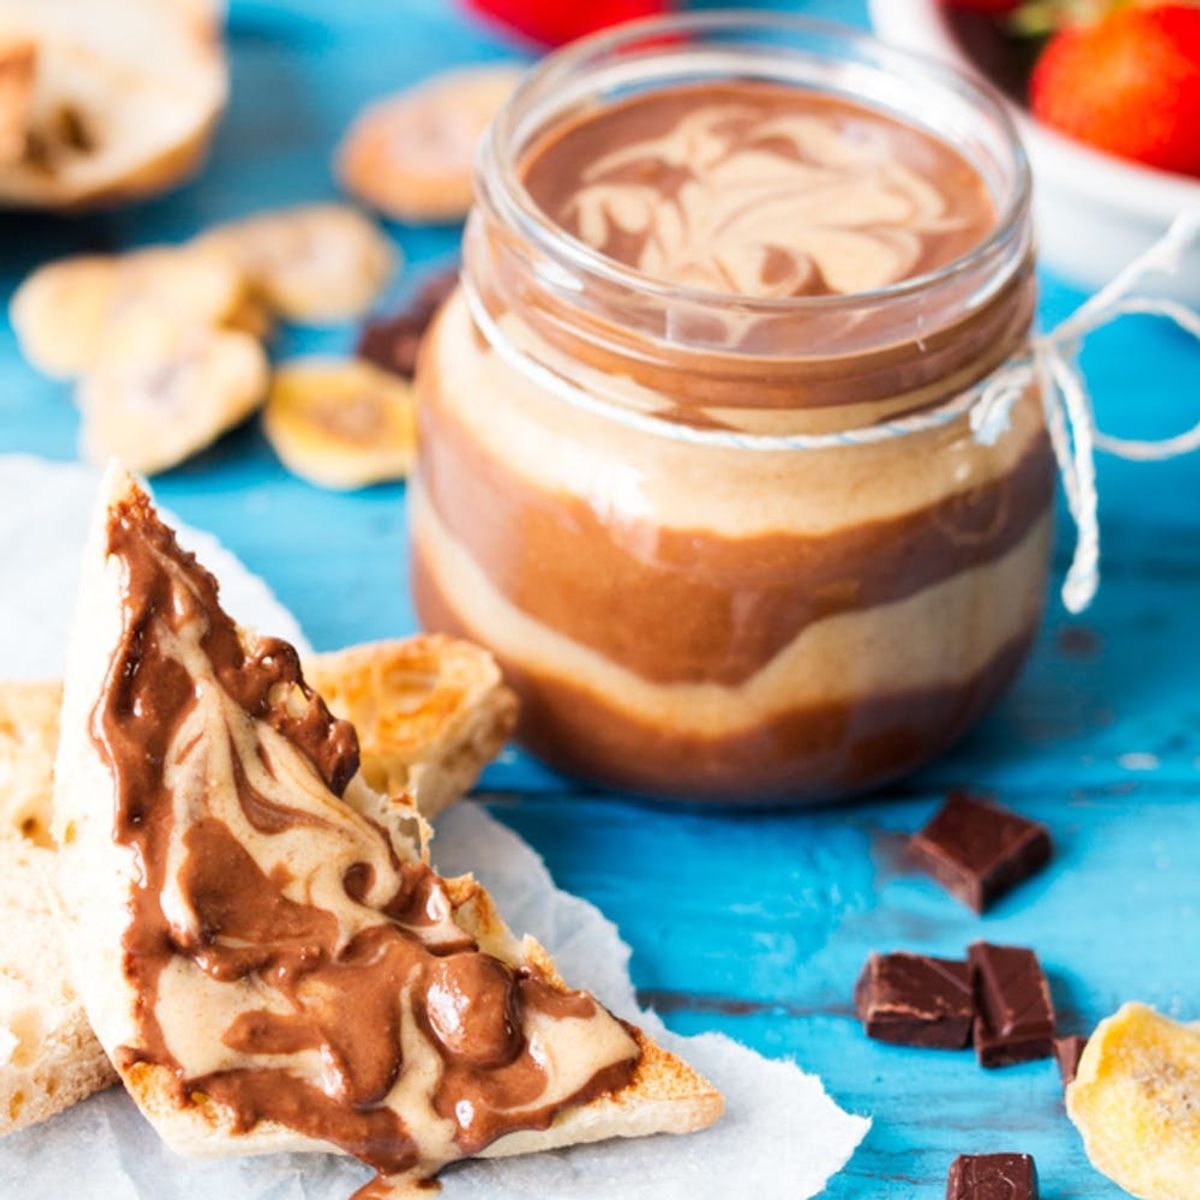 You’ll Go Bananas for This Ingenious Nut Butter Spread